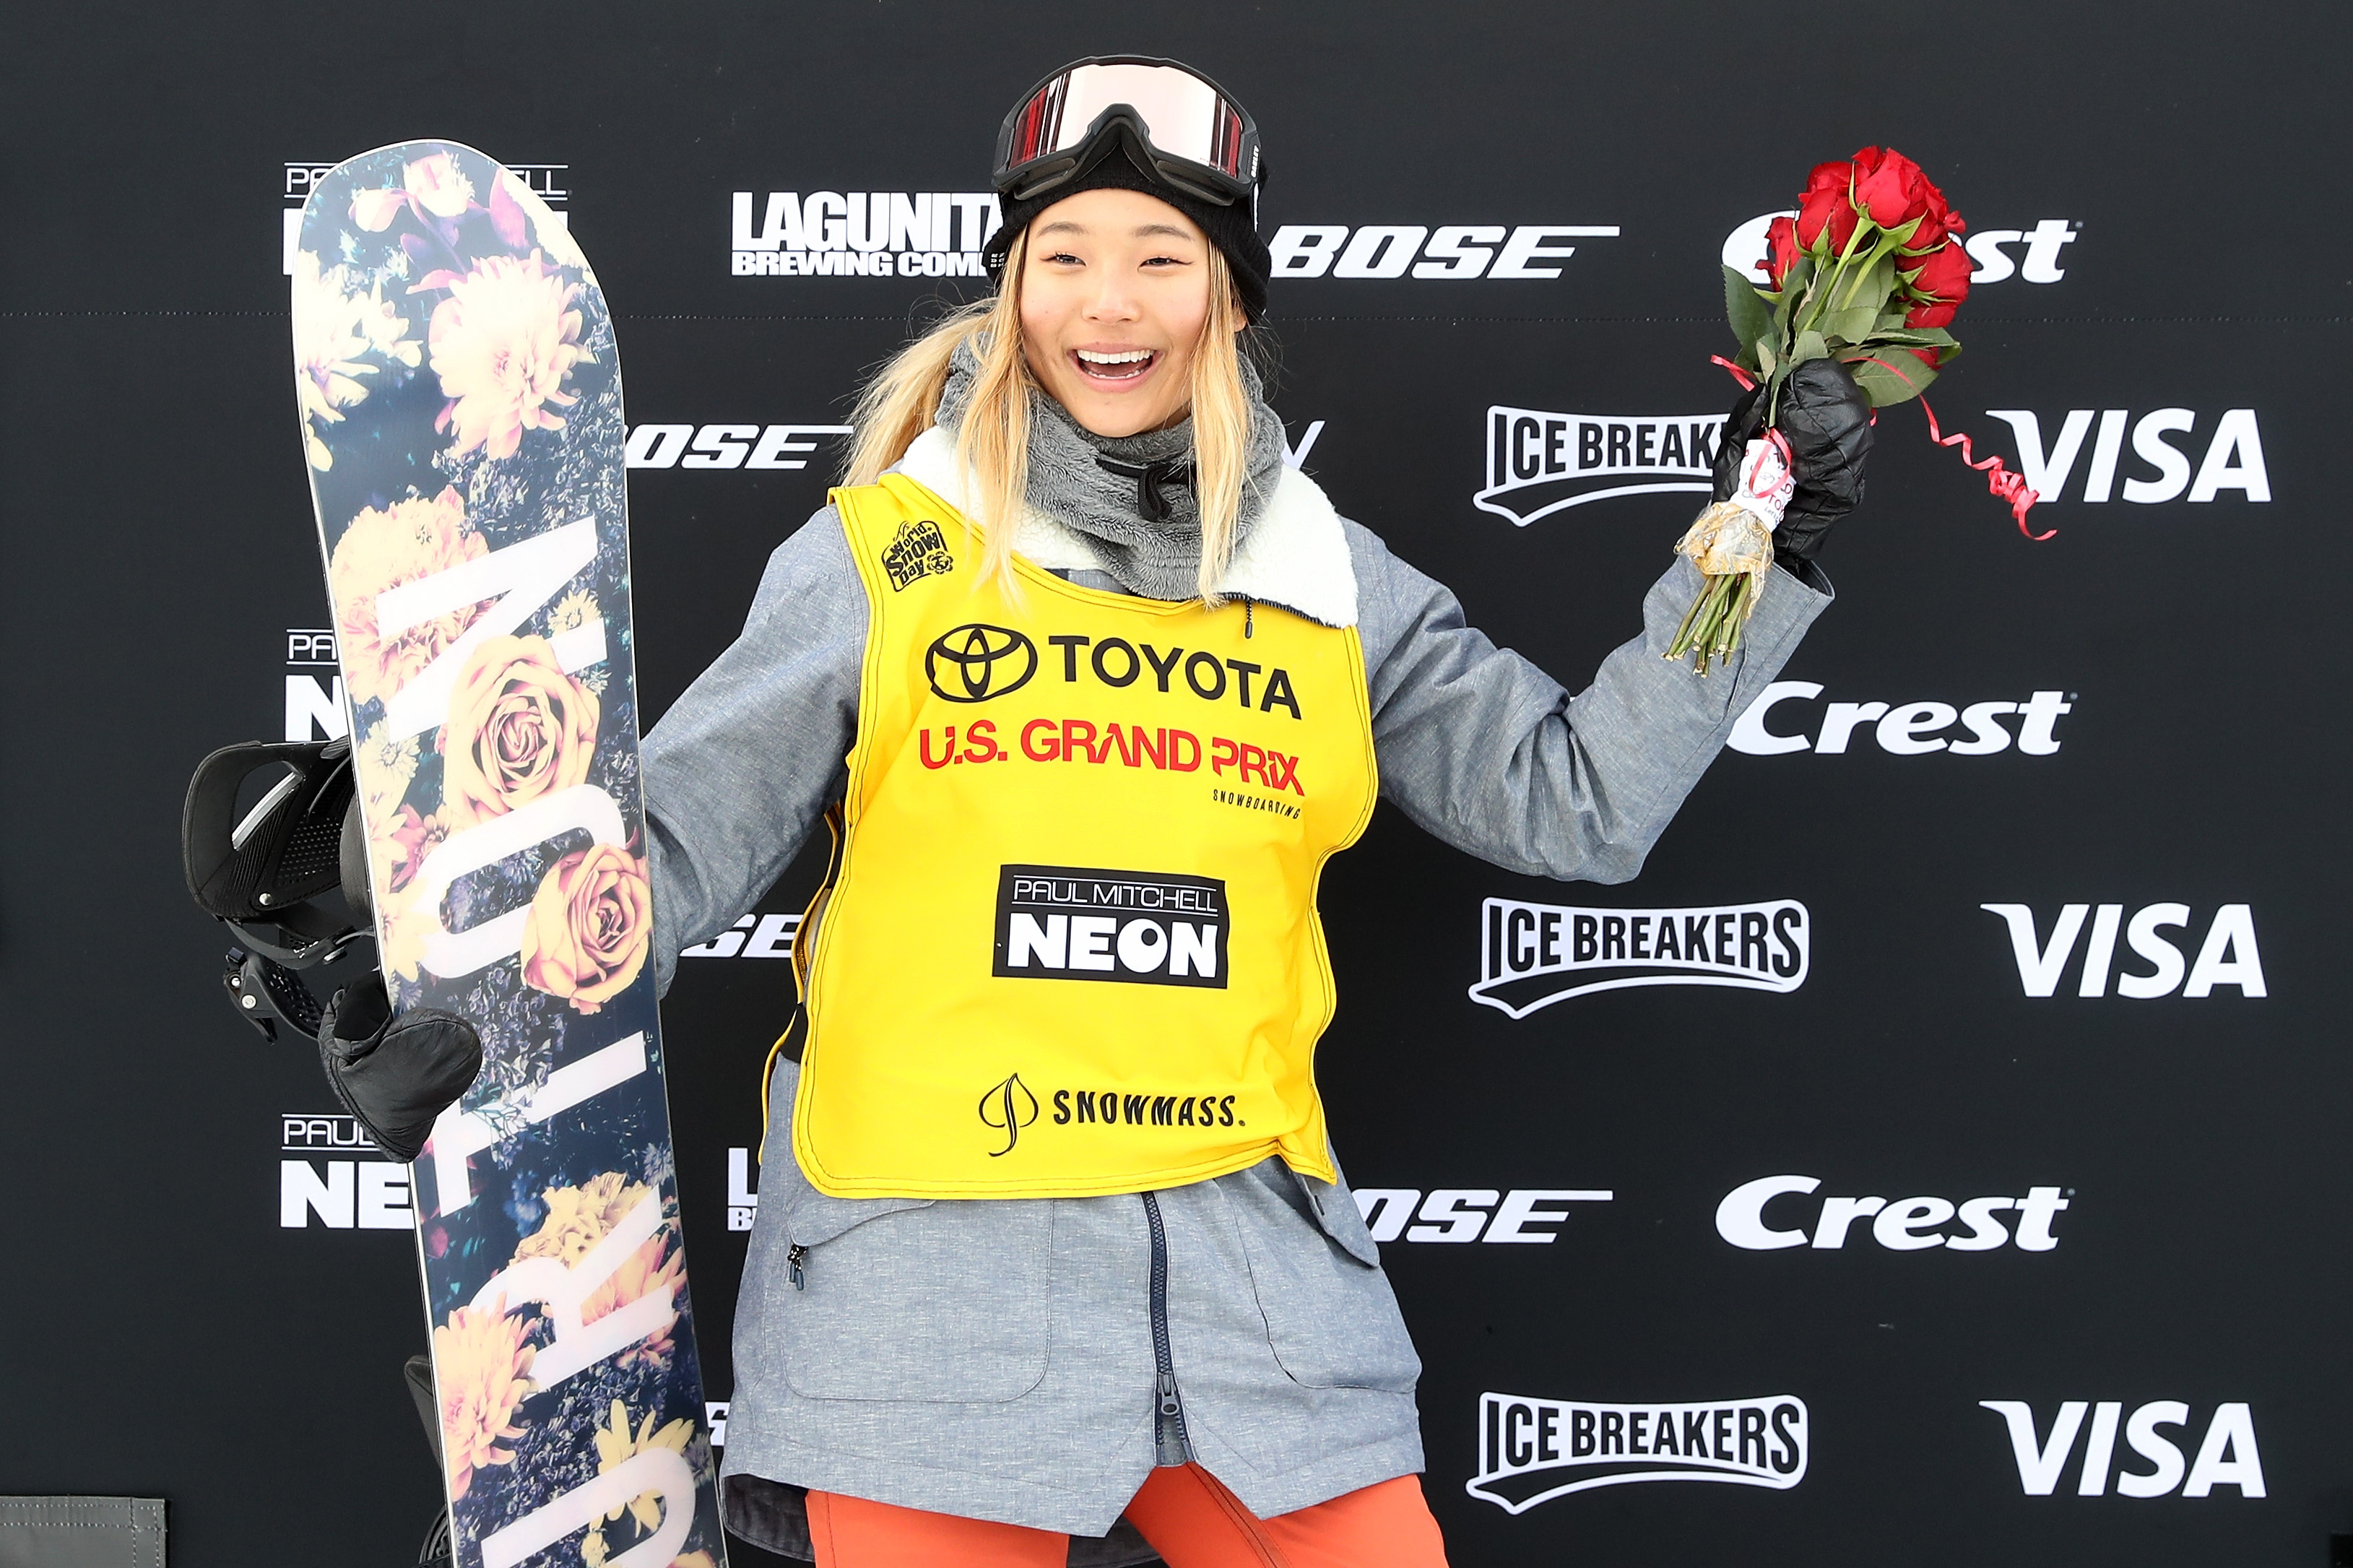 Chloe Kim #1 poses for photographers wearing her FIS points leader's bib after the Ladies Snowboard Halfpipe final during the Toyota U.S. Grand Prix on January 13, 2018 in Snowmass, Colorado. (Matthew Stockman—Getty Images)